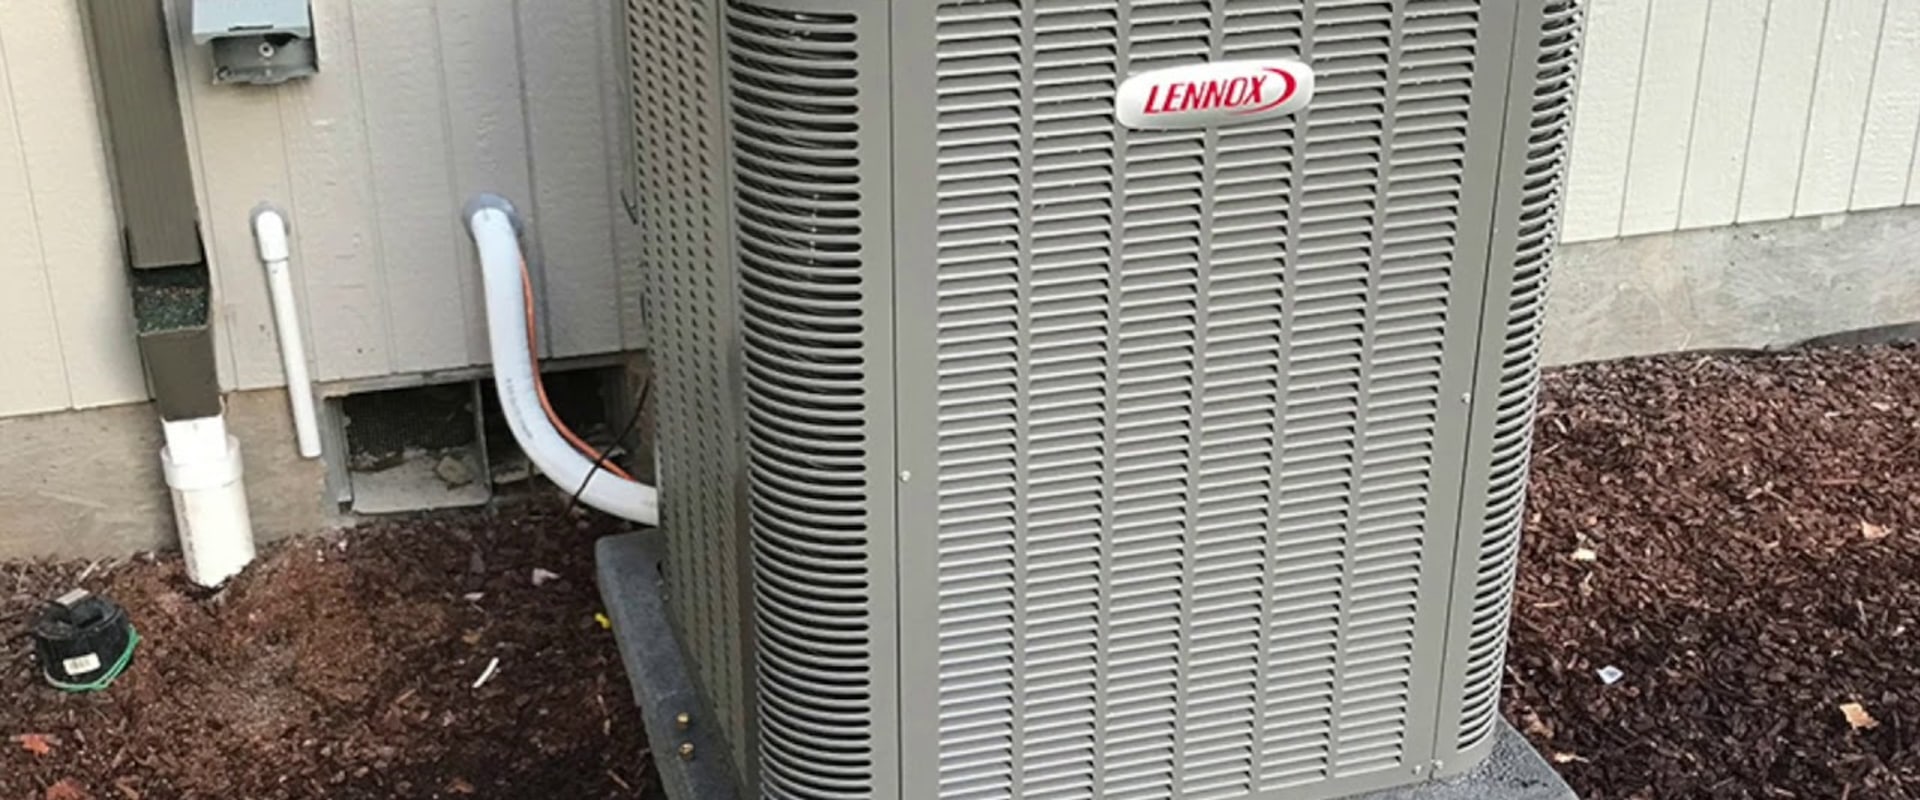 How Long Does It Take to Install a Heat Pump and Air Handler?